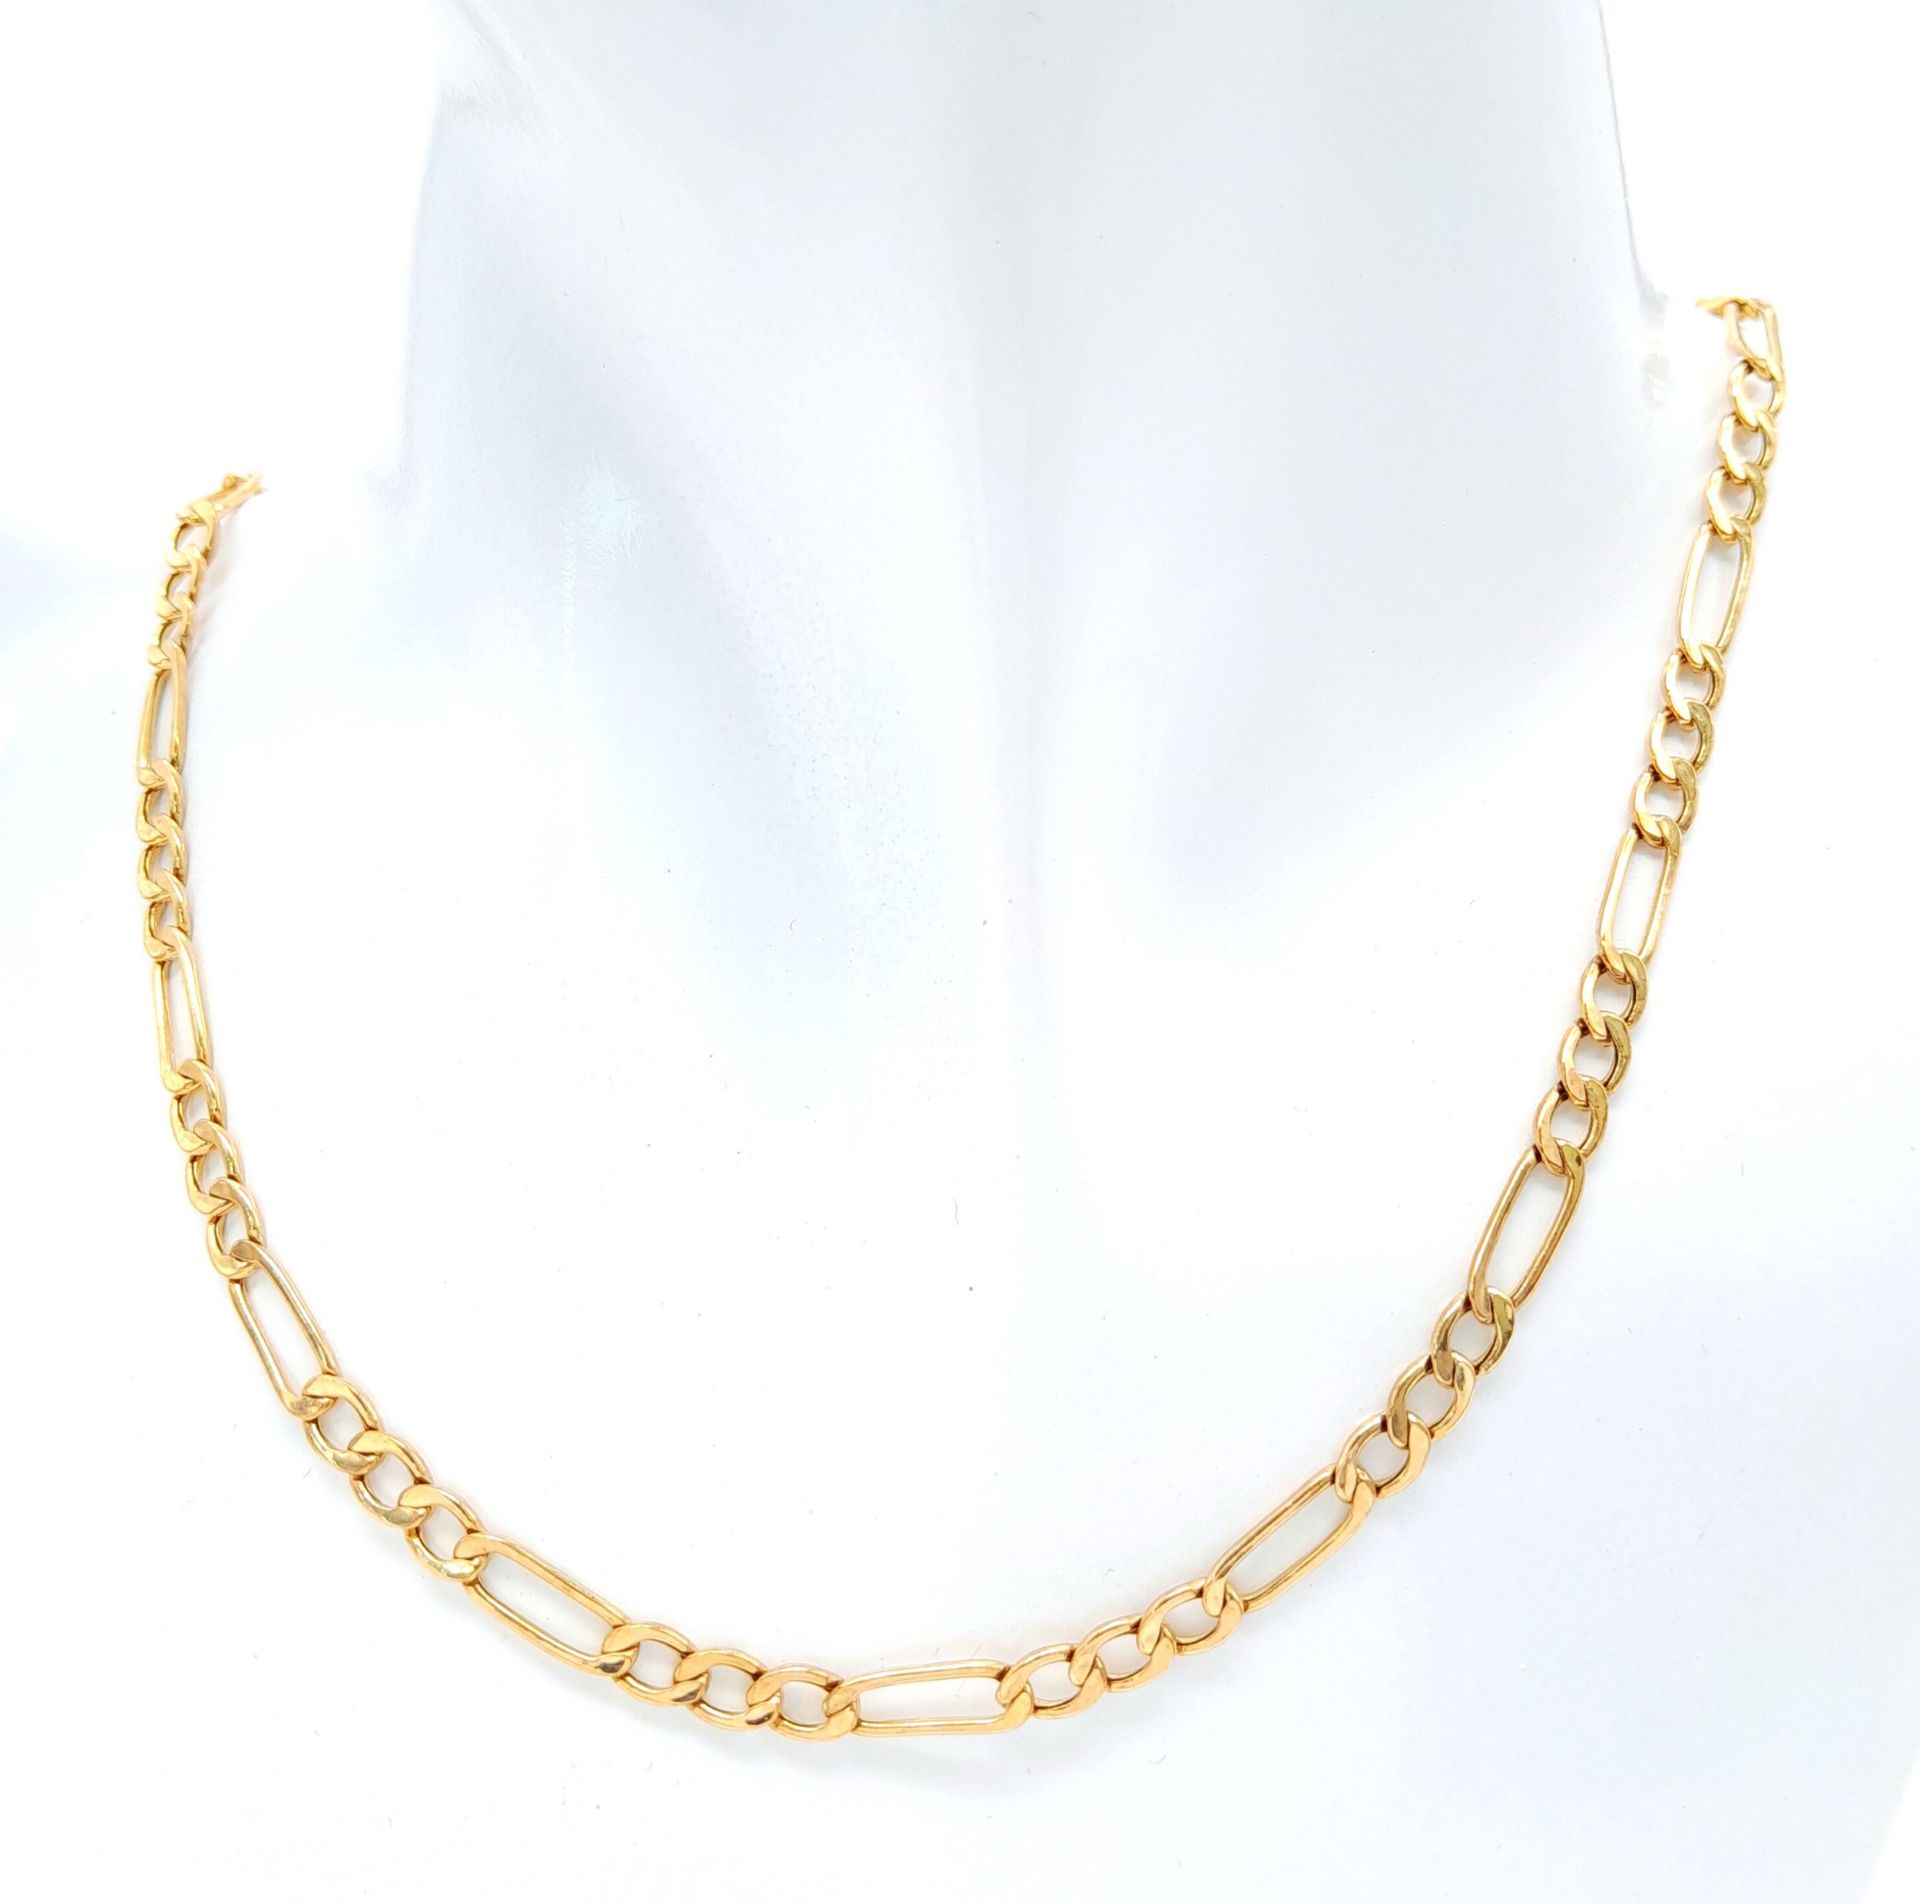 A 9K Yellow Gold Figaro Link Chain/Necklace. 46cm. 4.4g weight.